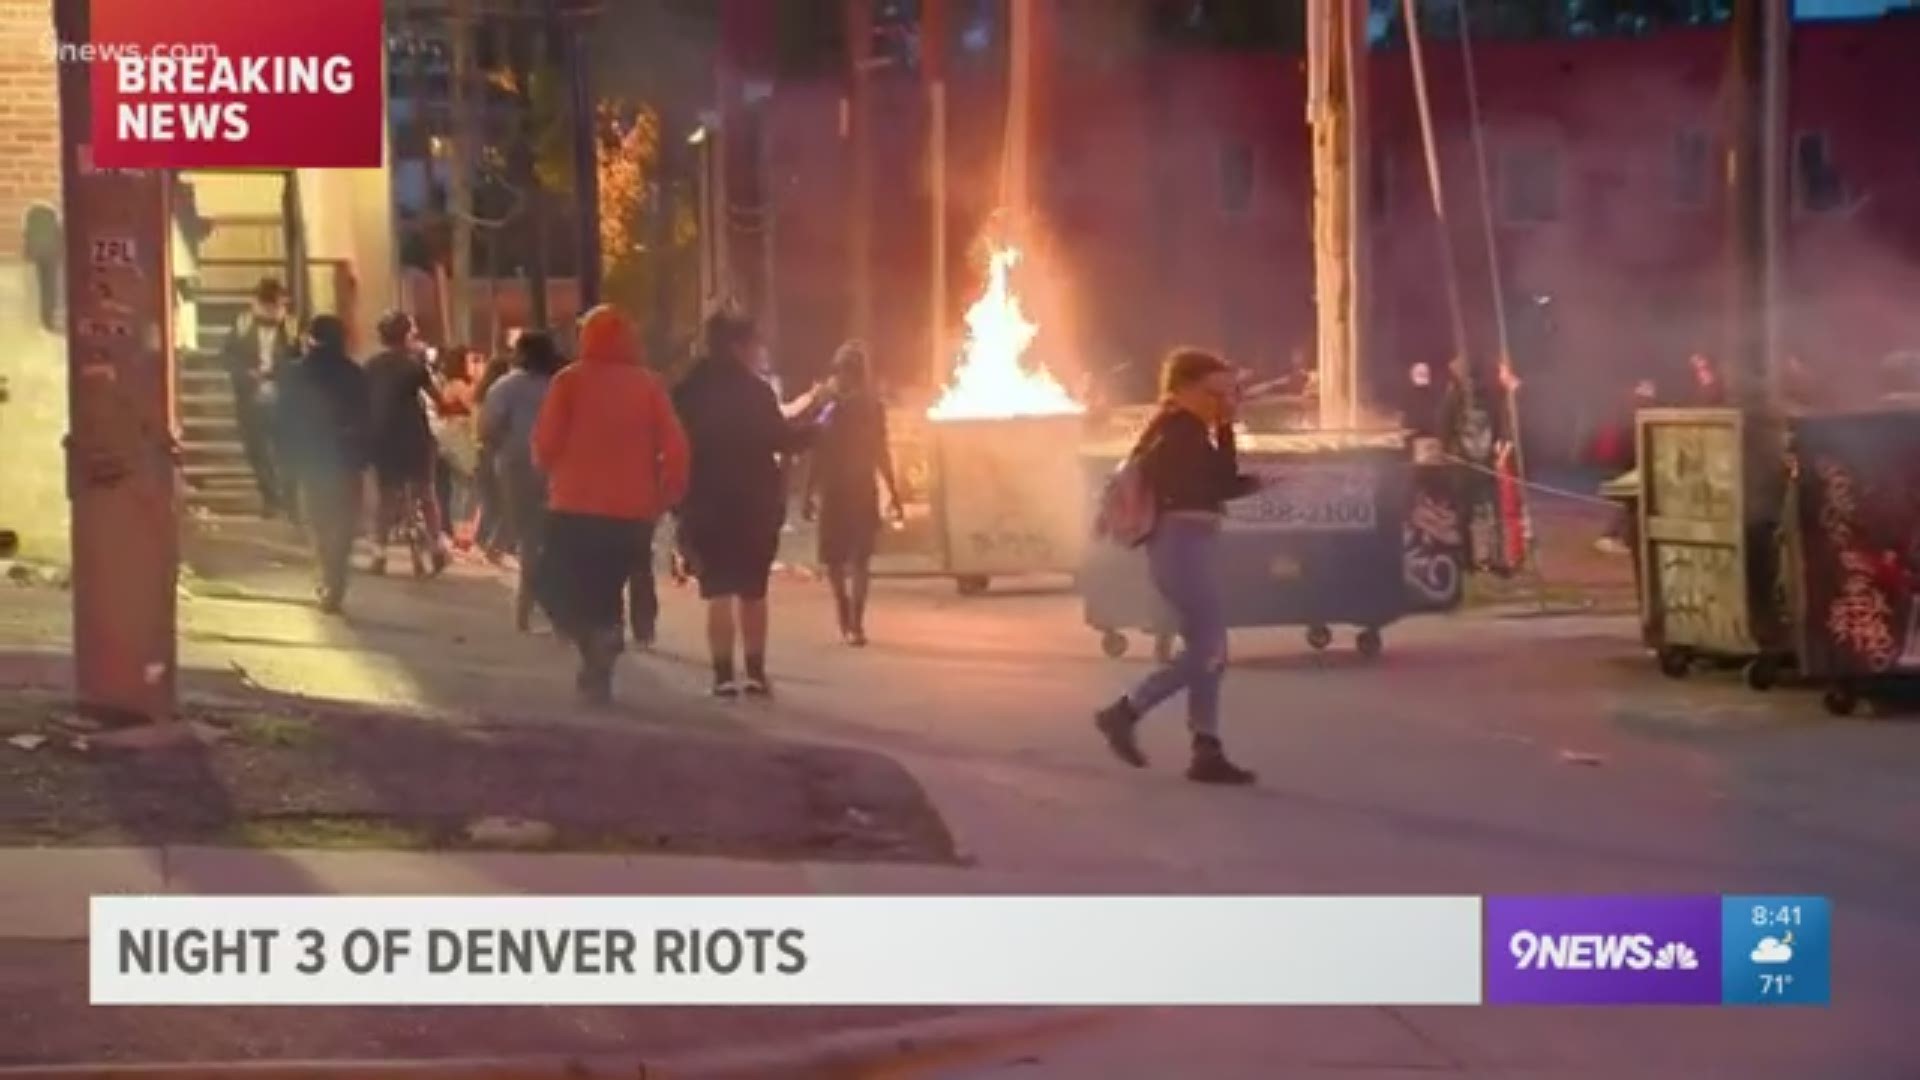 Noel Brennan is near 12th and Broadway where demonstrators set fire to at least 3 dumpsters in the area.